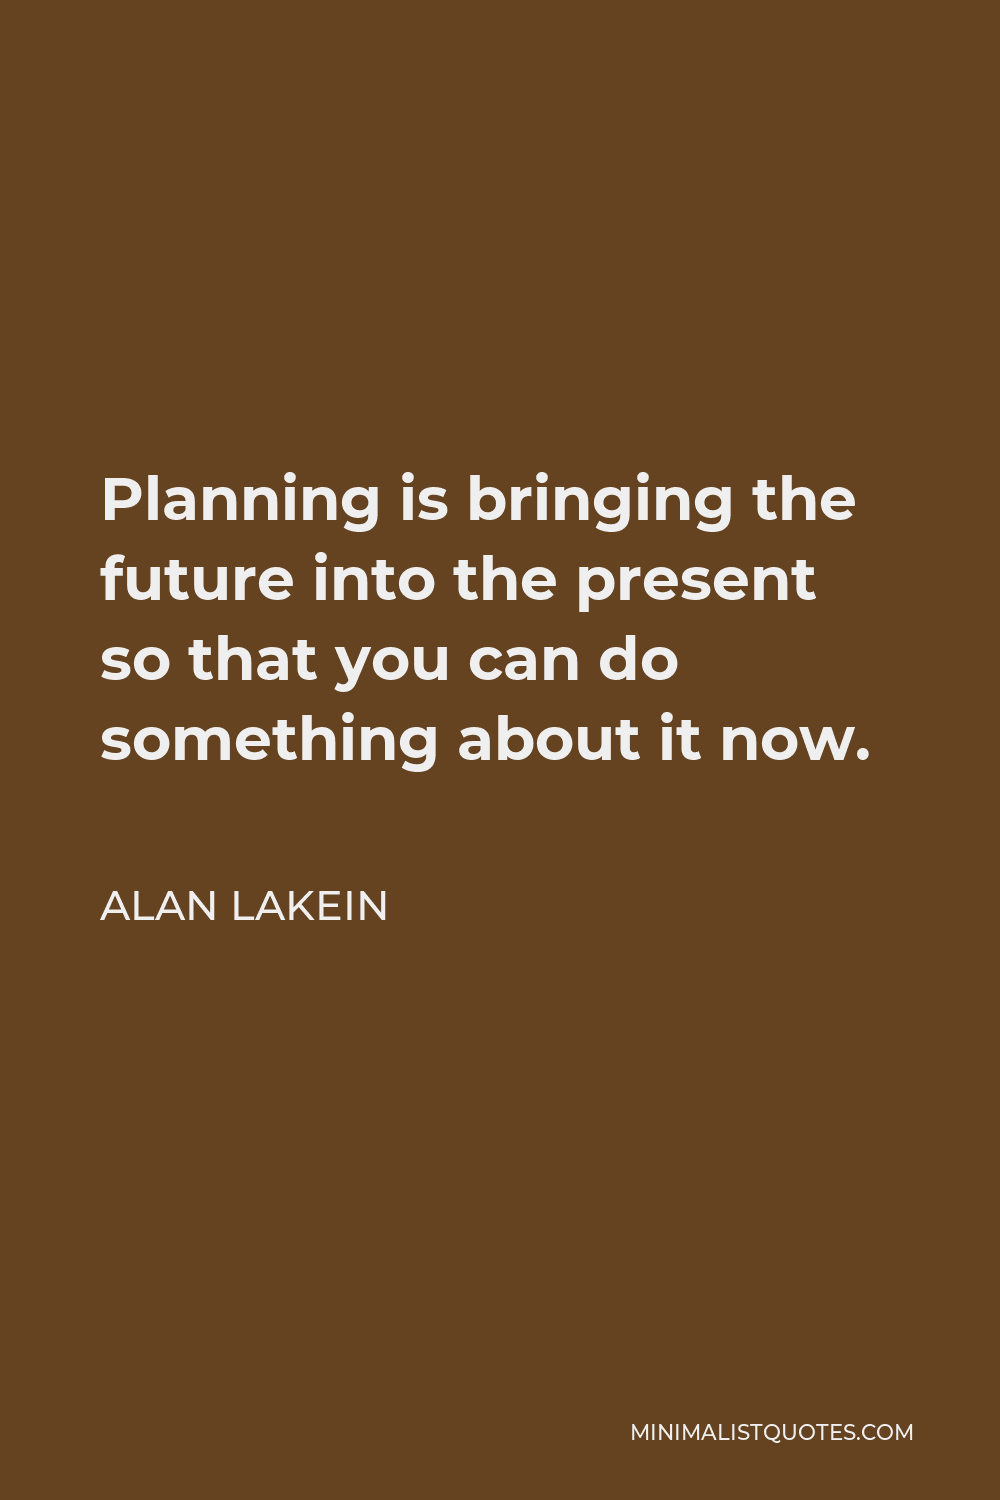 Alan Lakein Quote - Planning is bringing the future into the present so that you can do something about it now.